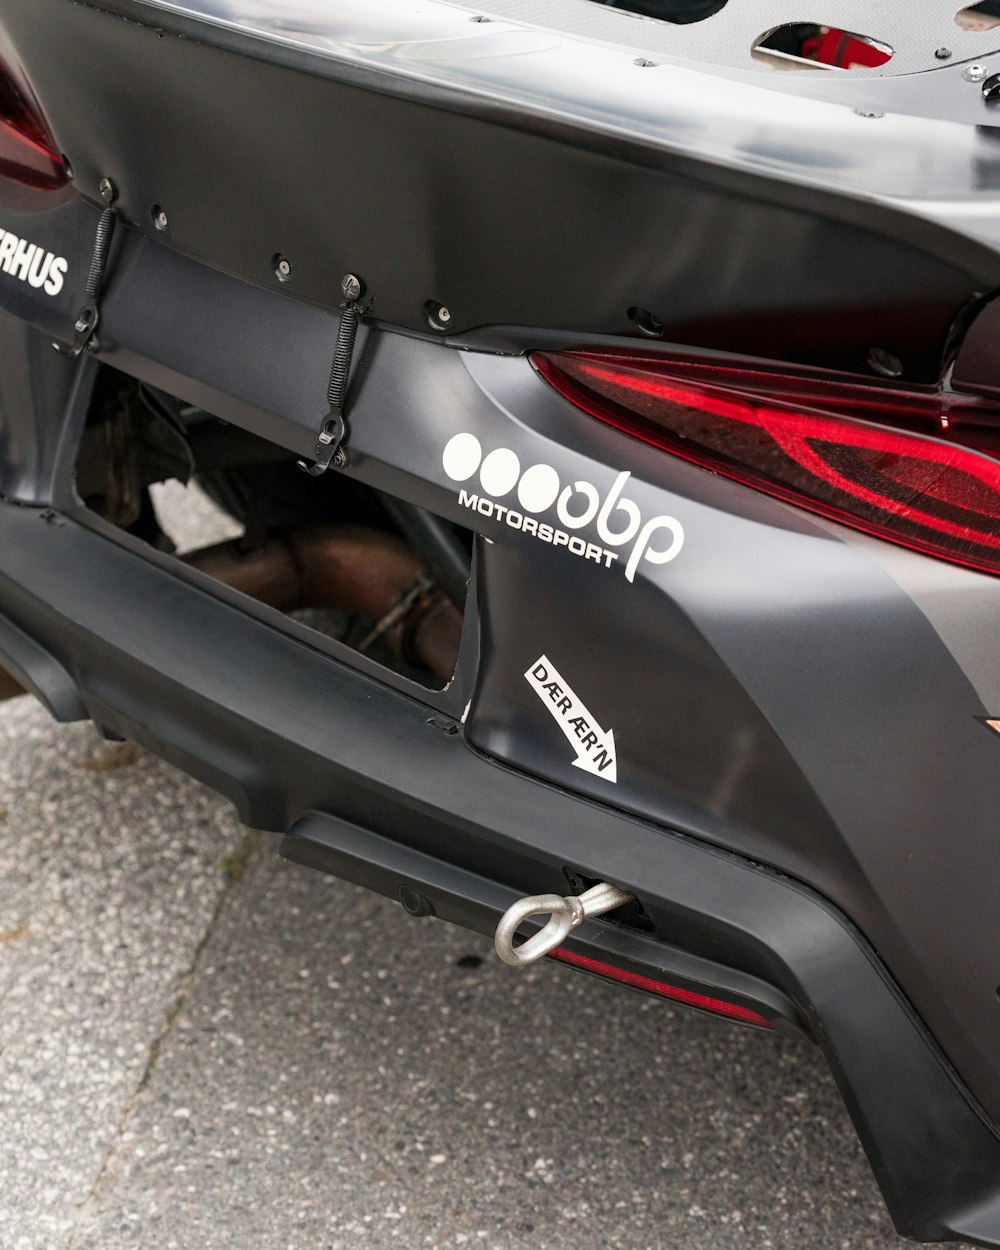 a close up of the rear end of a sports car